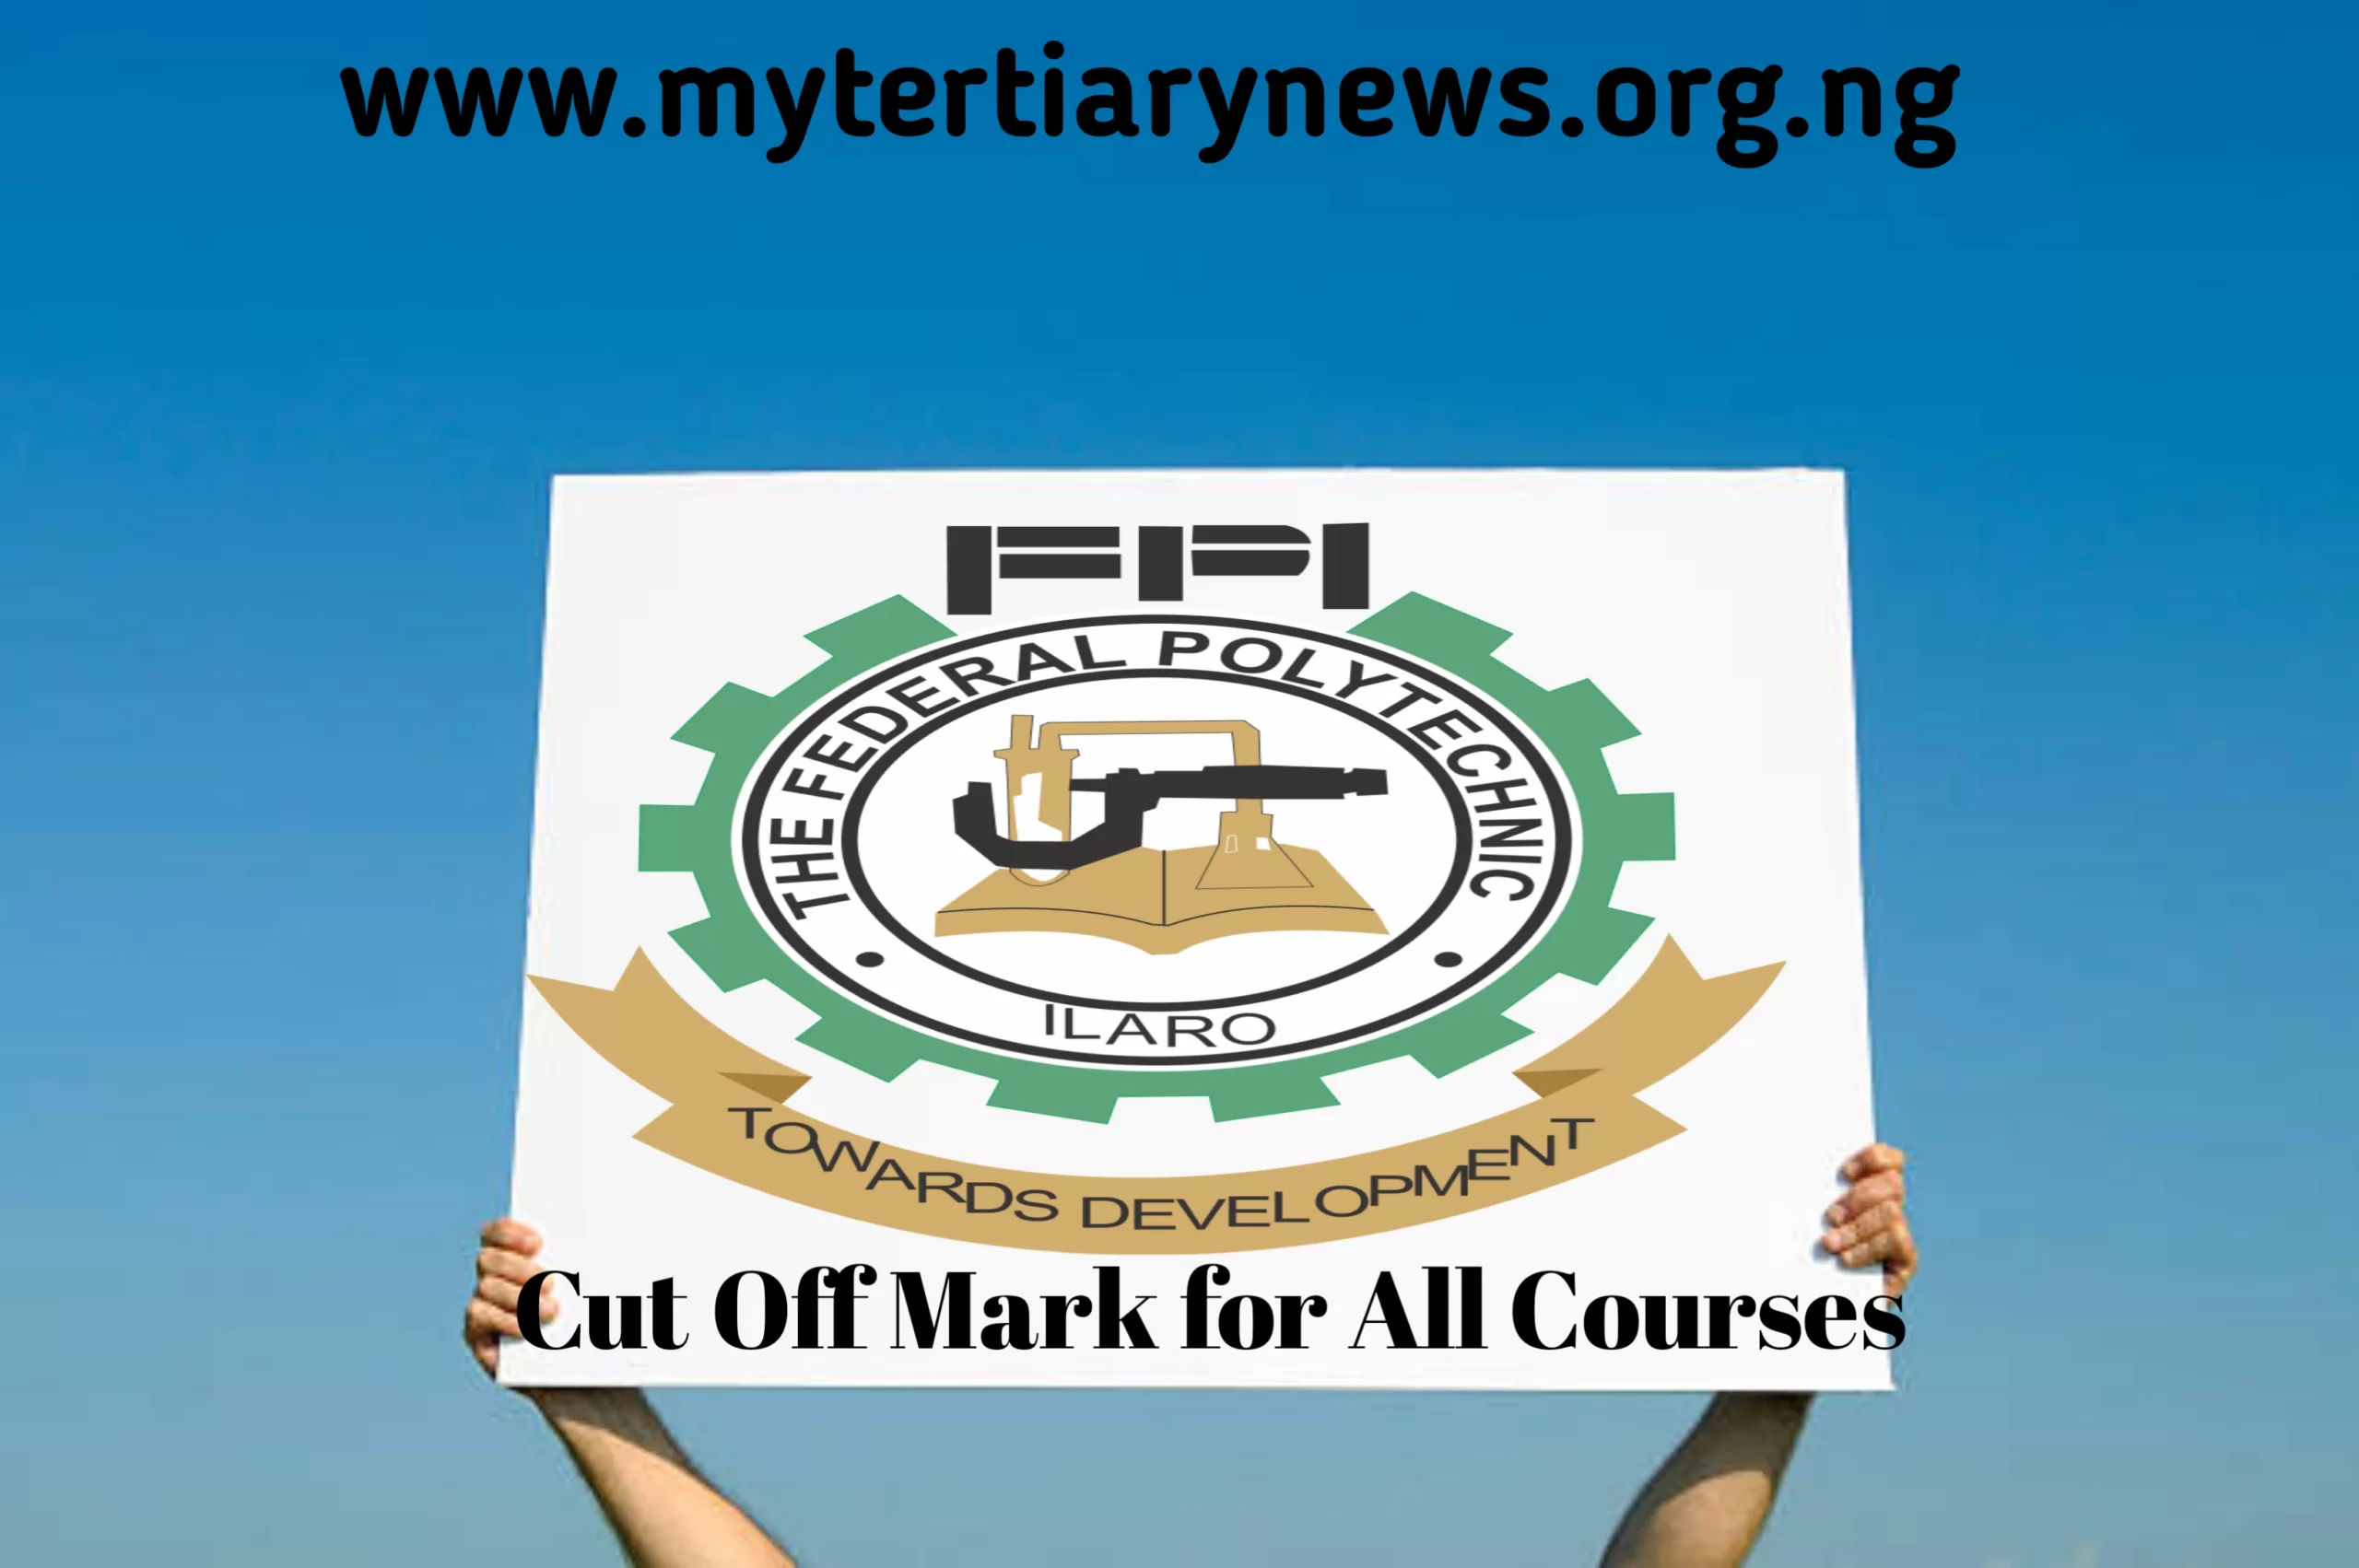 Federal Polytechnic Ilaro Image || What is Federal Polytechnic Ilaro Cut Off Mark for All Courses